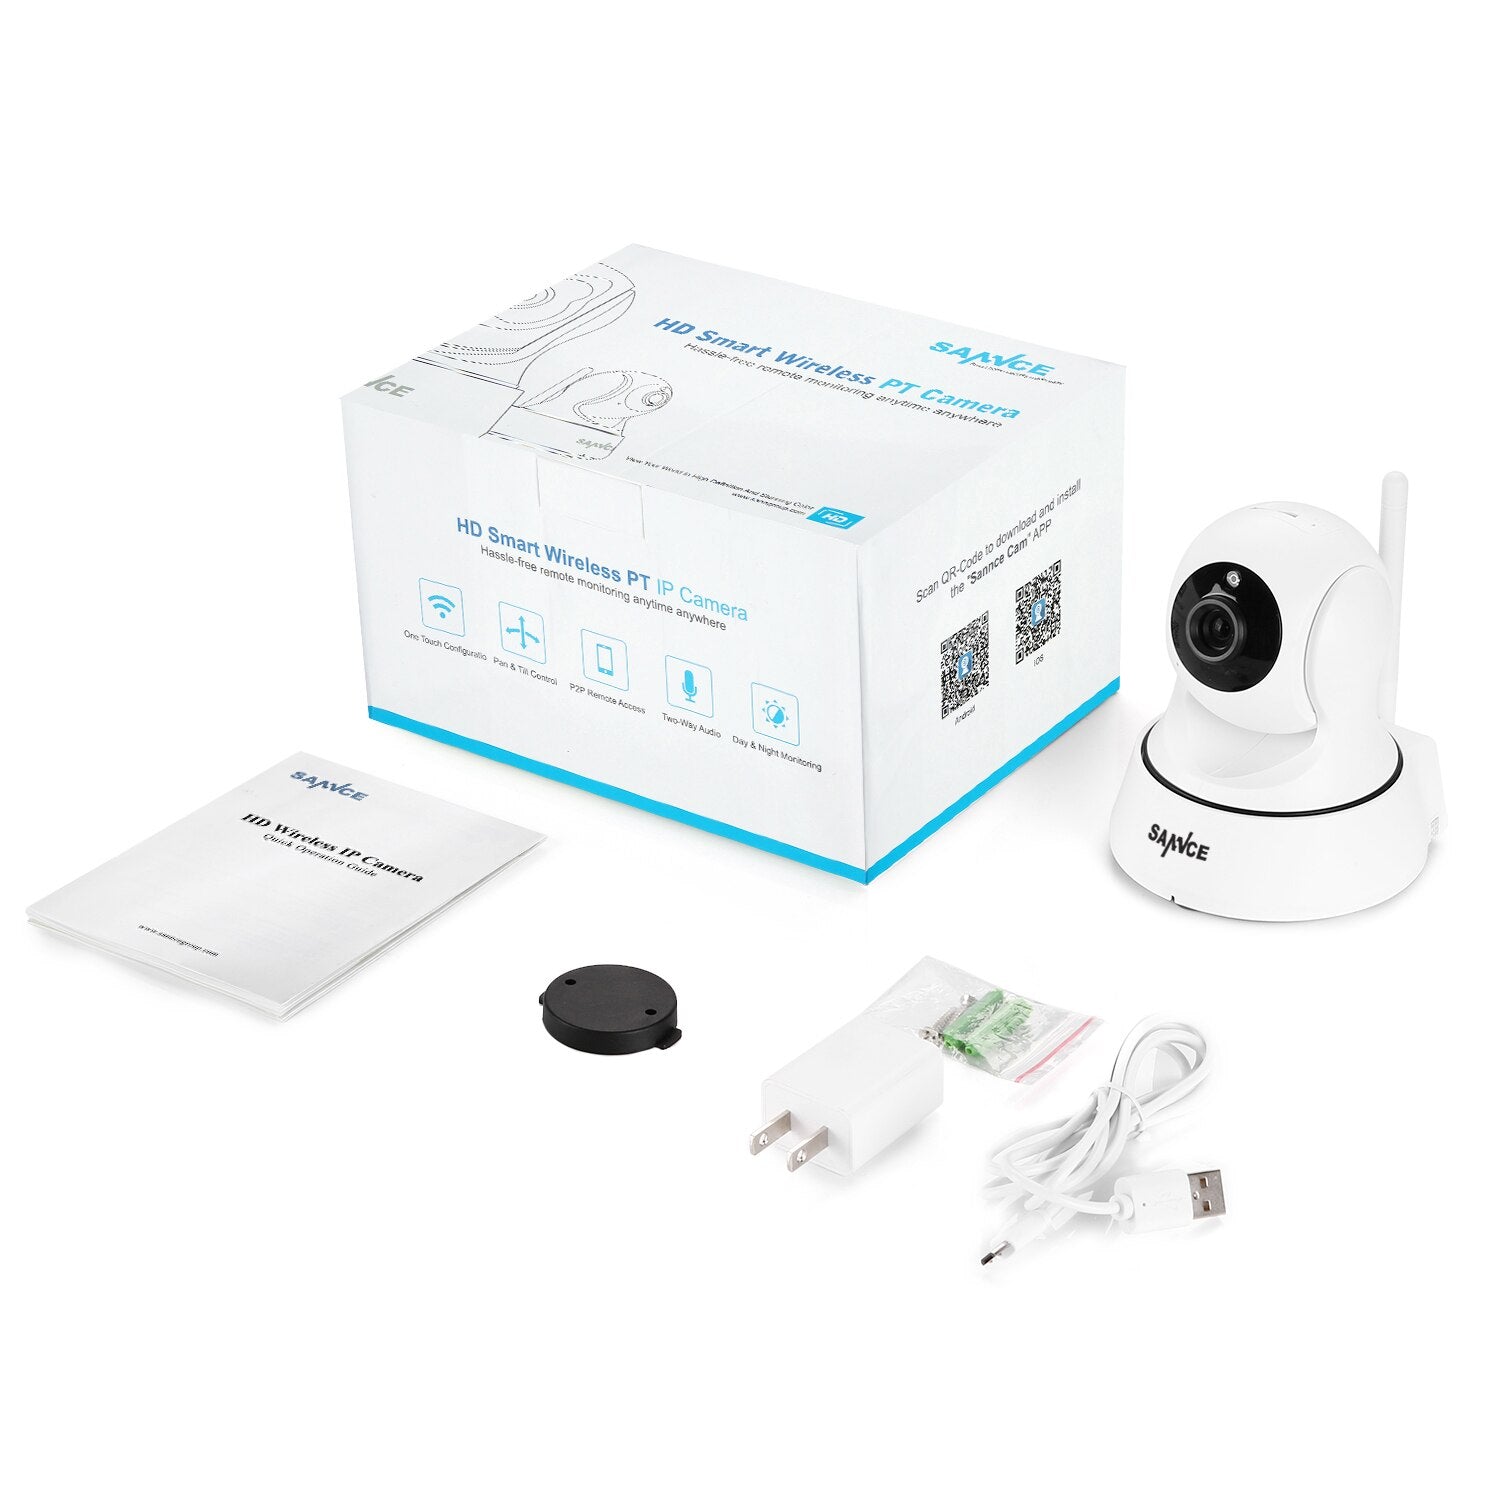 Home Security Surveillance Camera for Baby Monitor - Find Epic Store